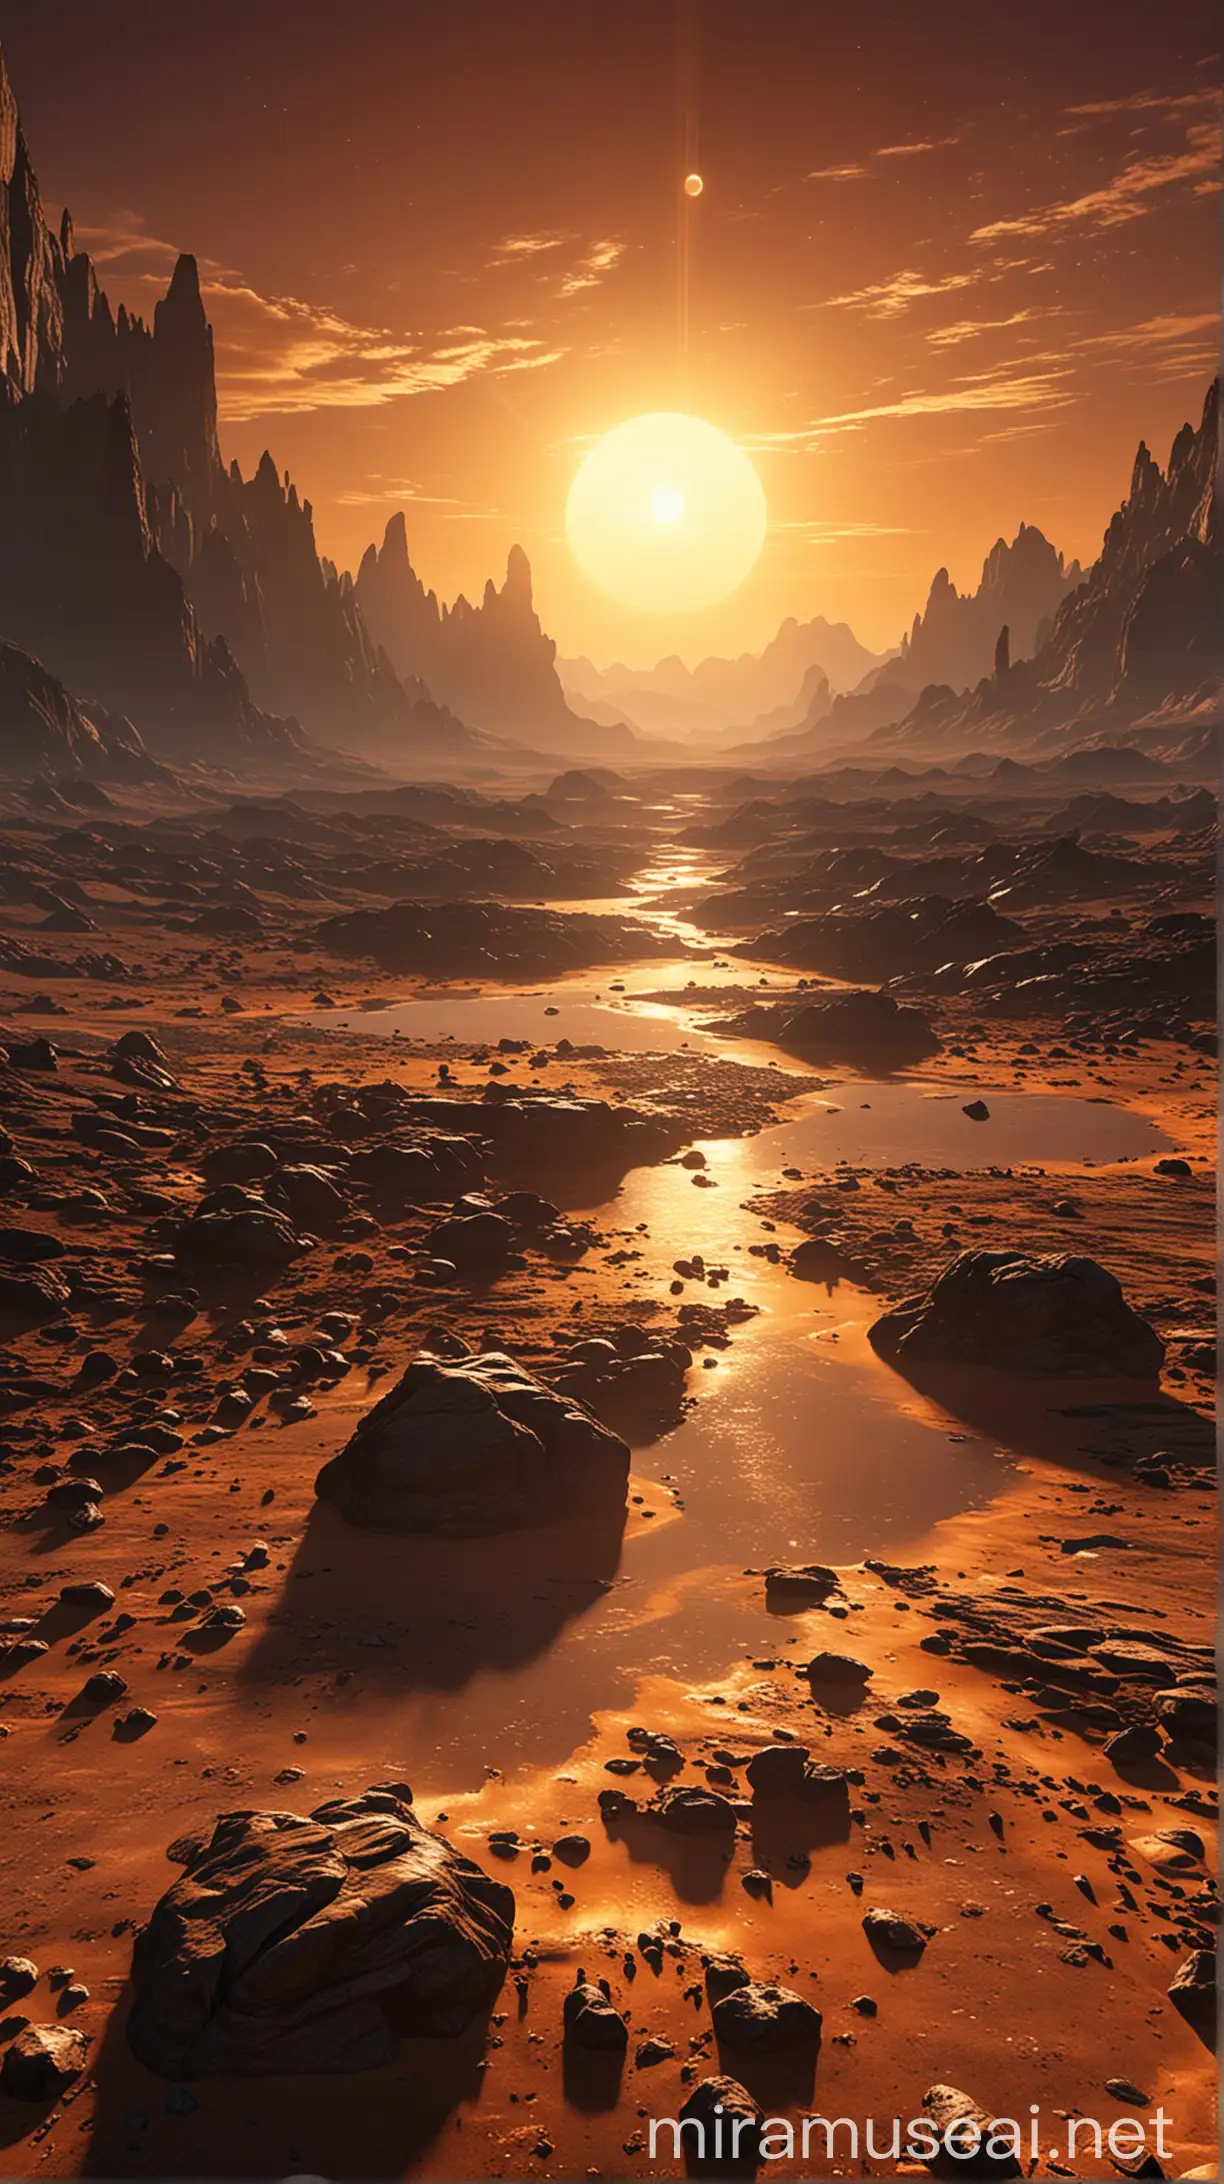 Alien Planet Landscape with Dual Suns Setting Rocky Terrains and Distant Mountains